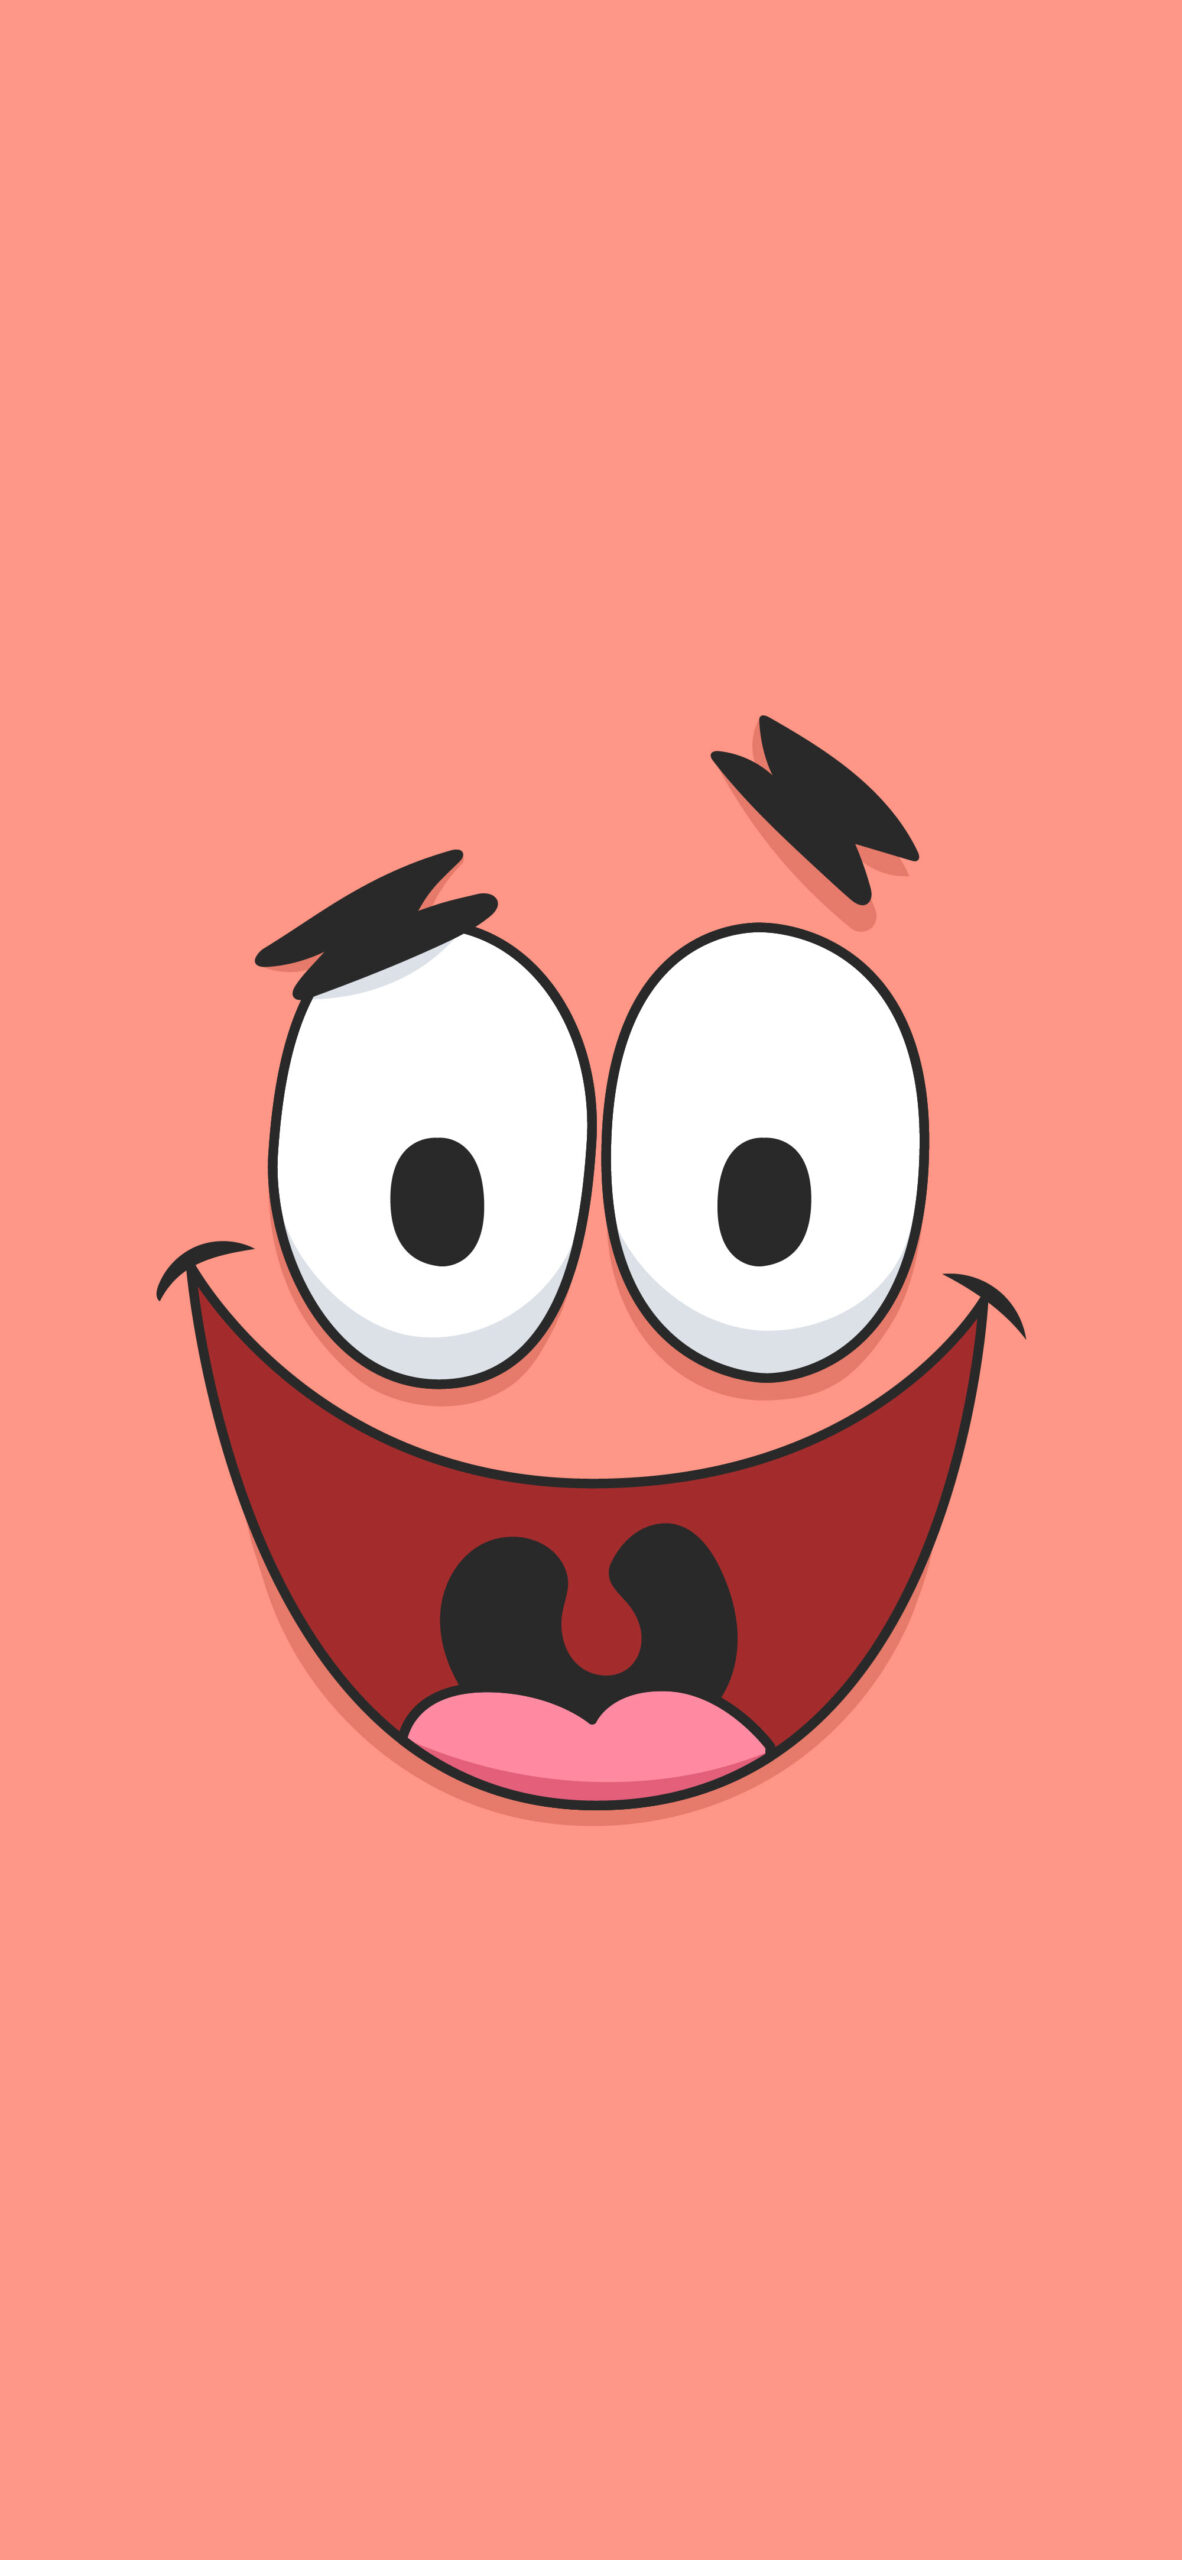 1182x2560 SpongeBob Wallpapers with Patrick Star Smiling Face and Shorts Patter